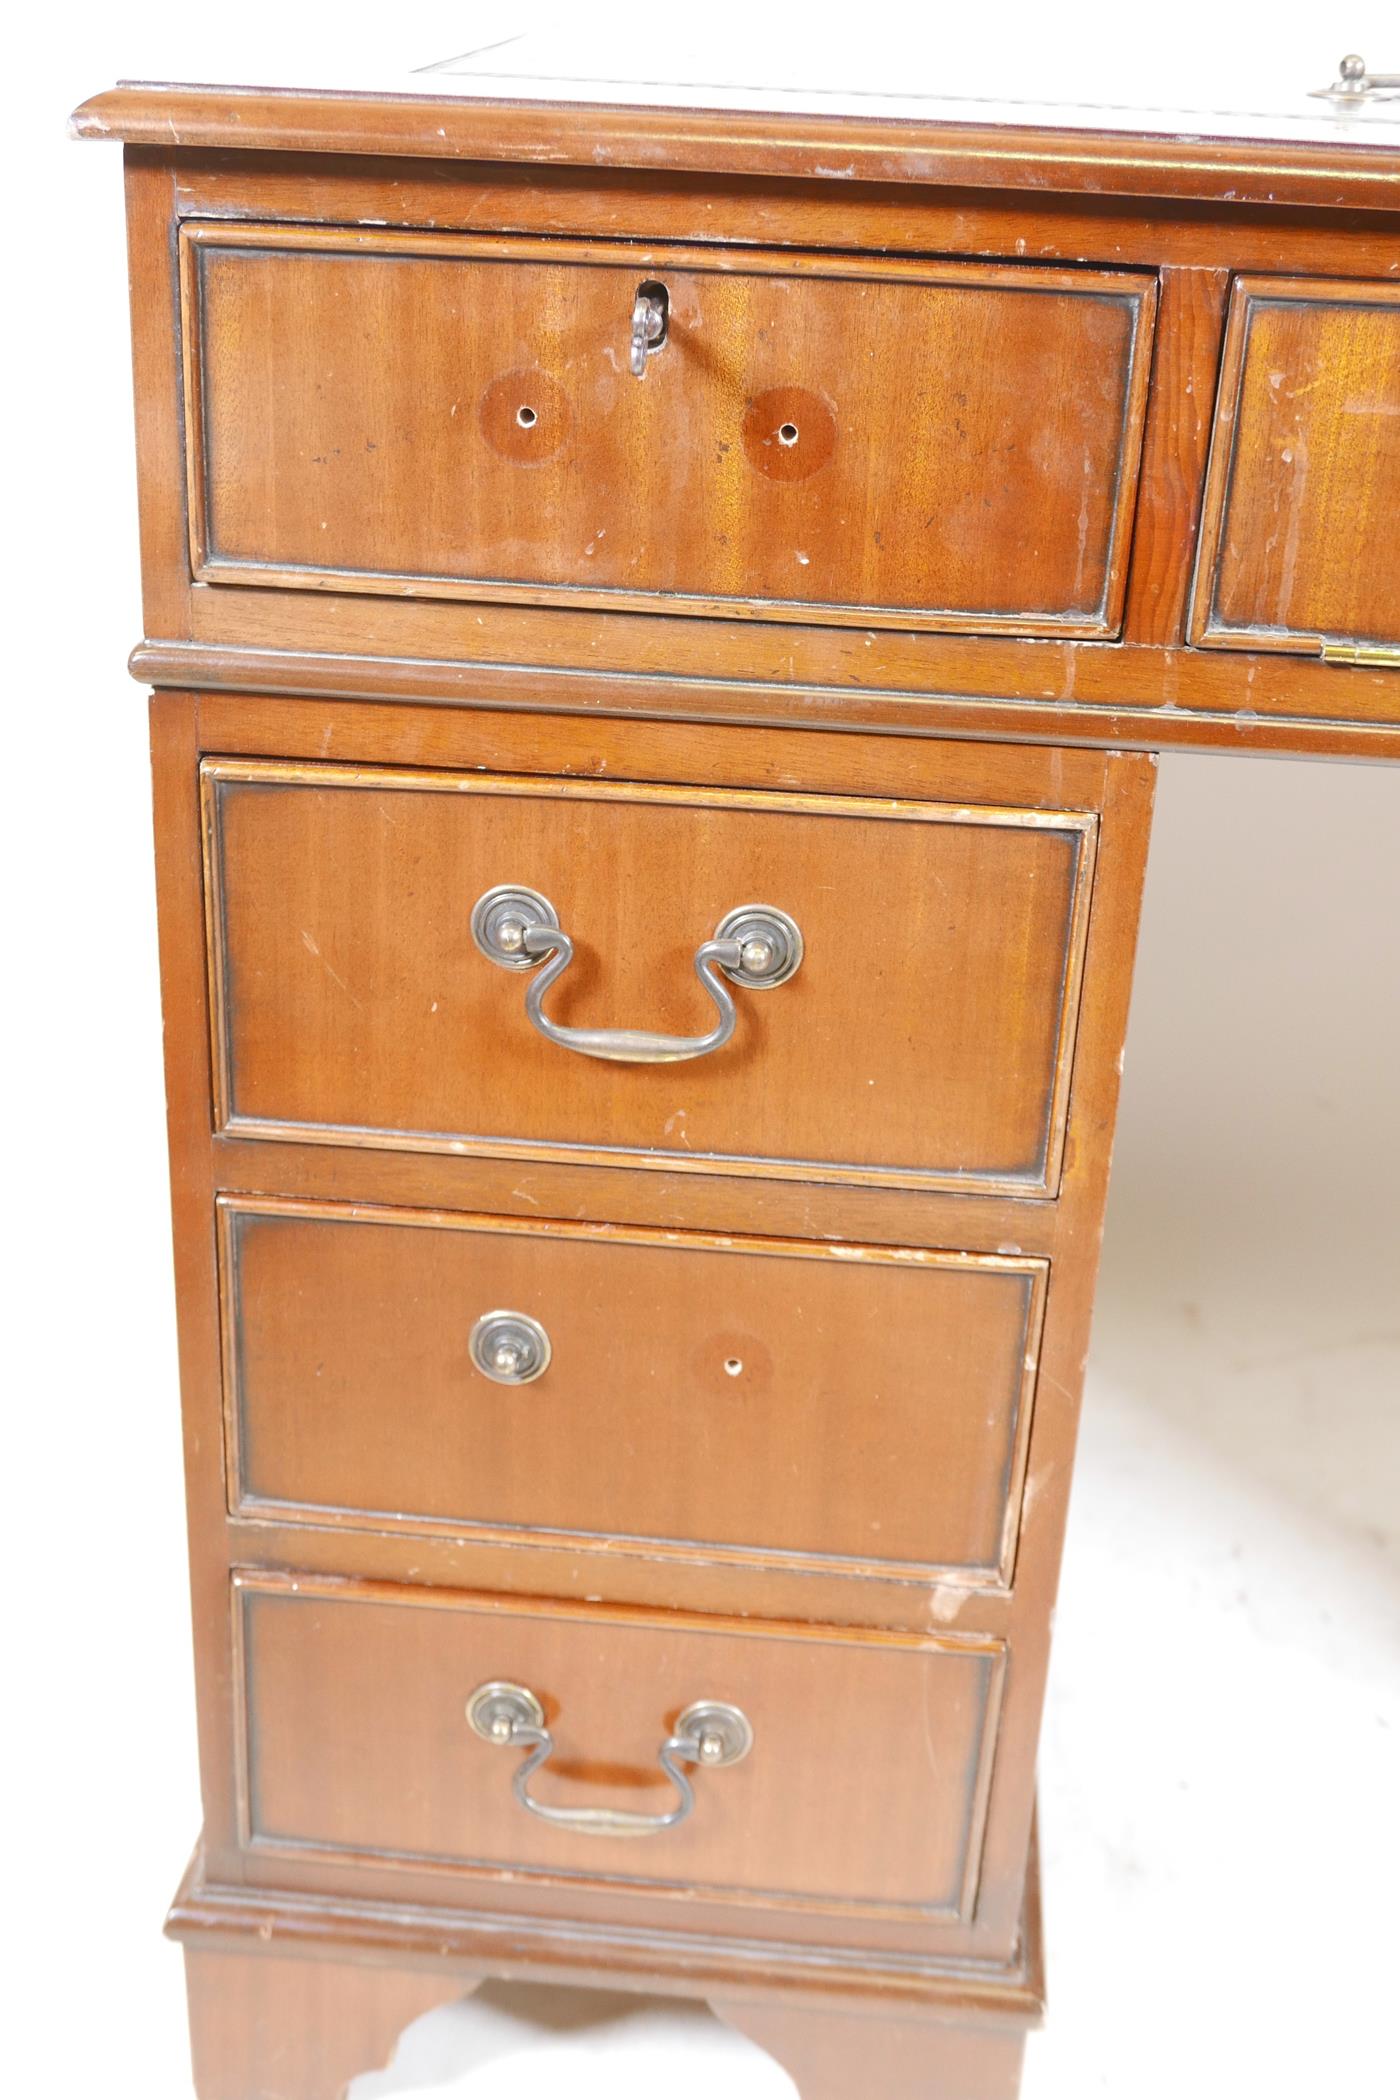 A mahogany pedestal desk with a tooled inset top, hidden keyboard drawer/slide, drawers and a - Image 2 of 6